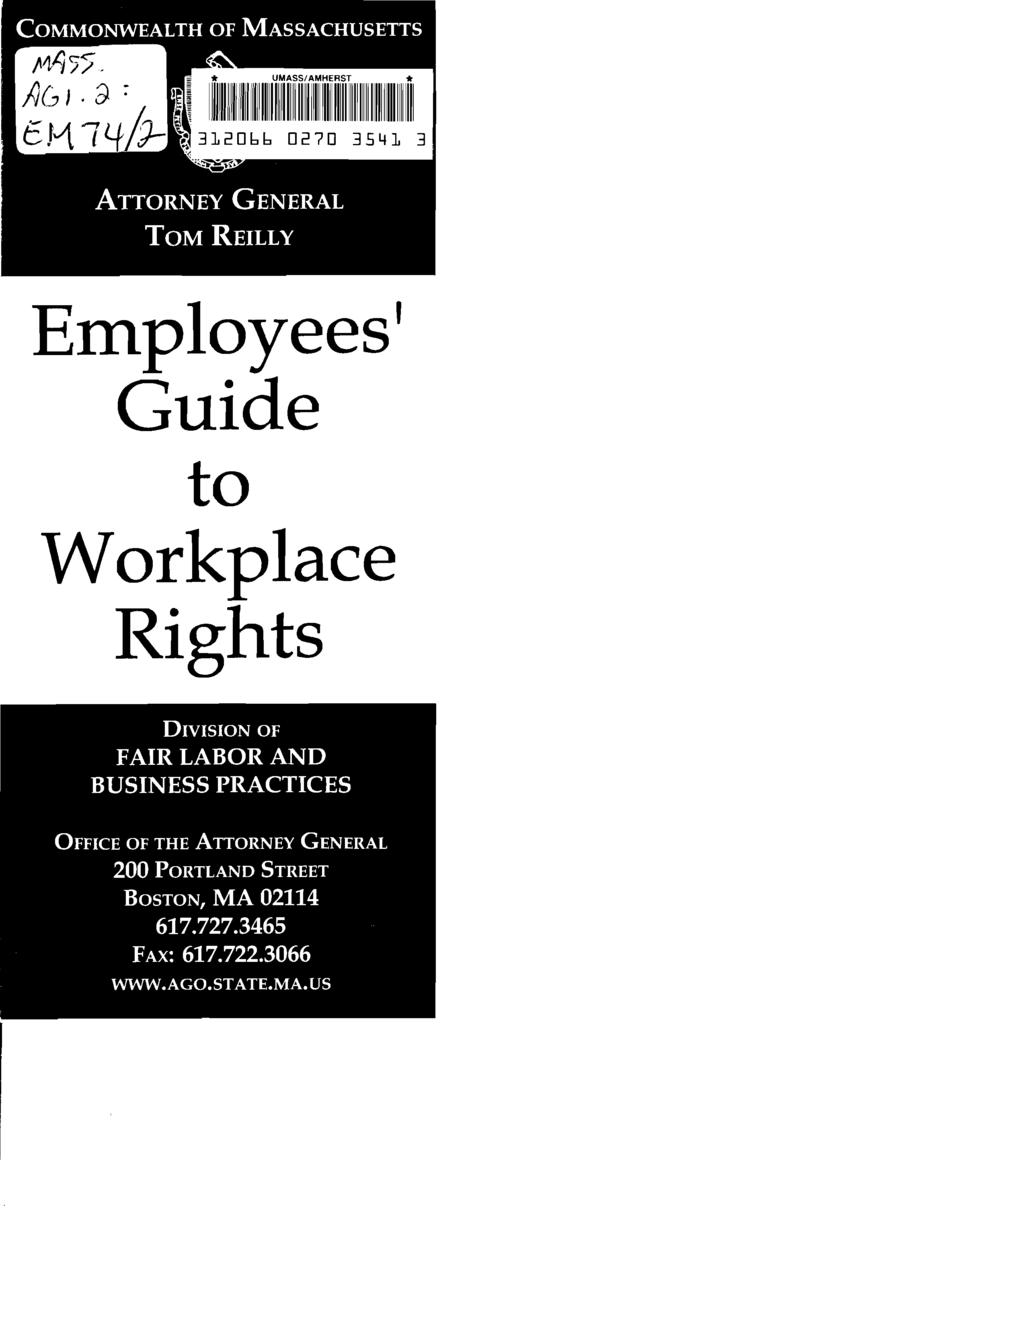 Employees' Guide